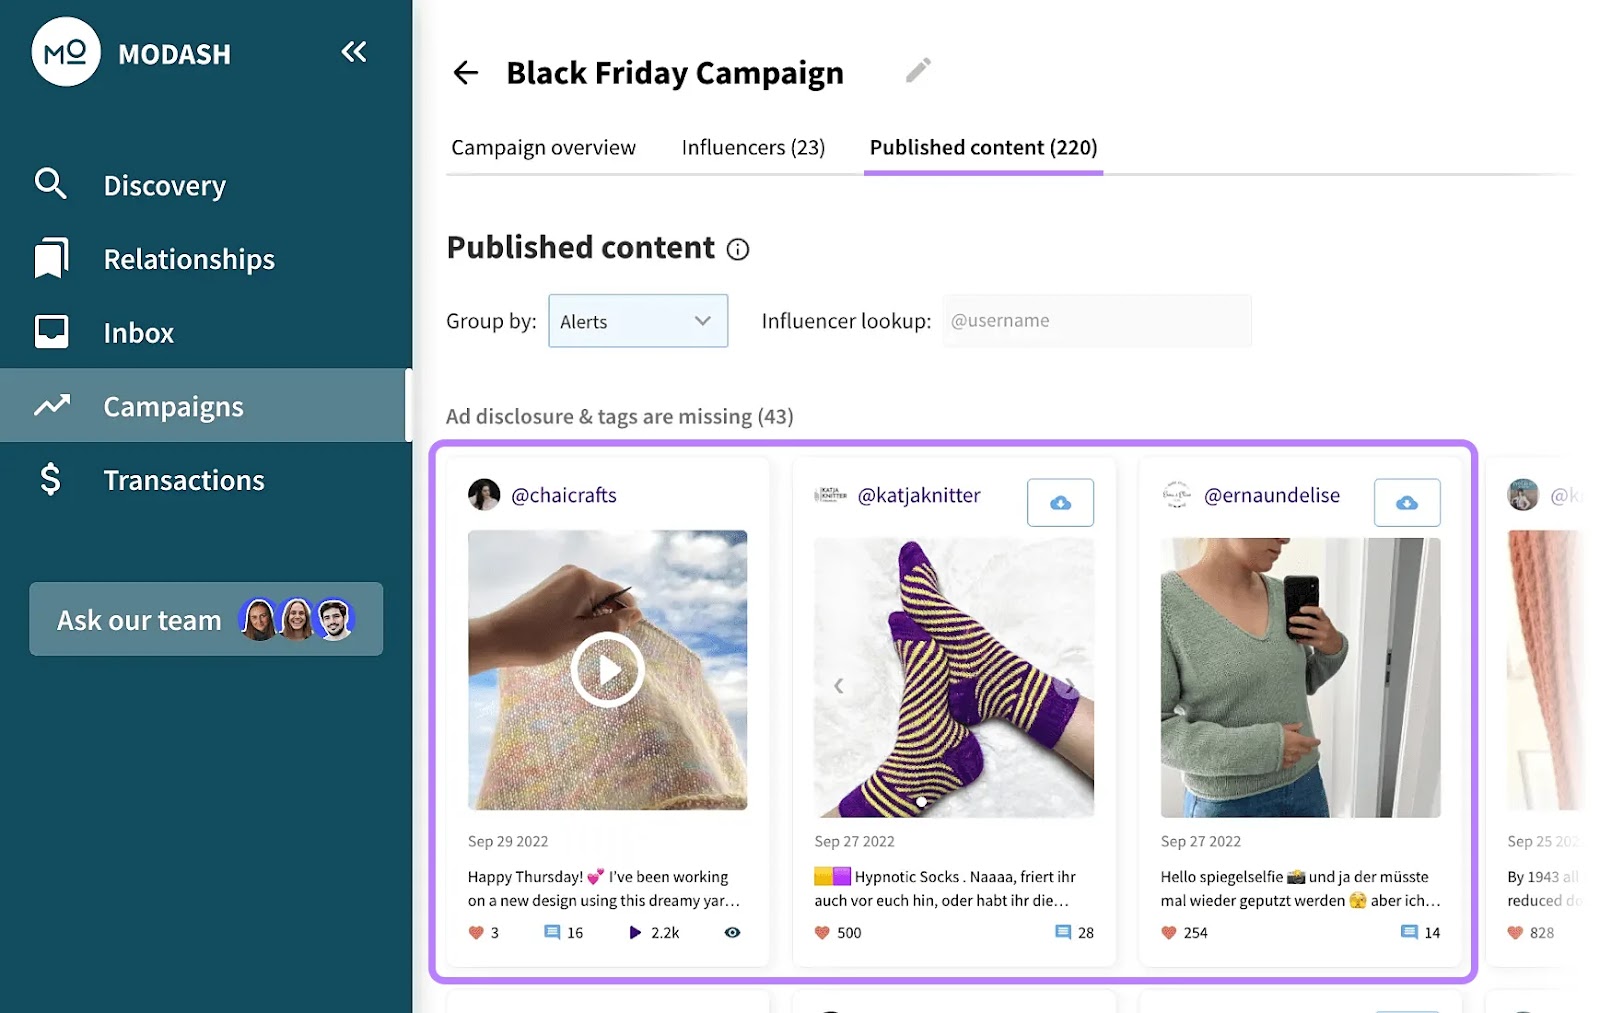 influencer content related to Black Friday campaign s،wn on Modash's dashboard